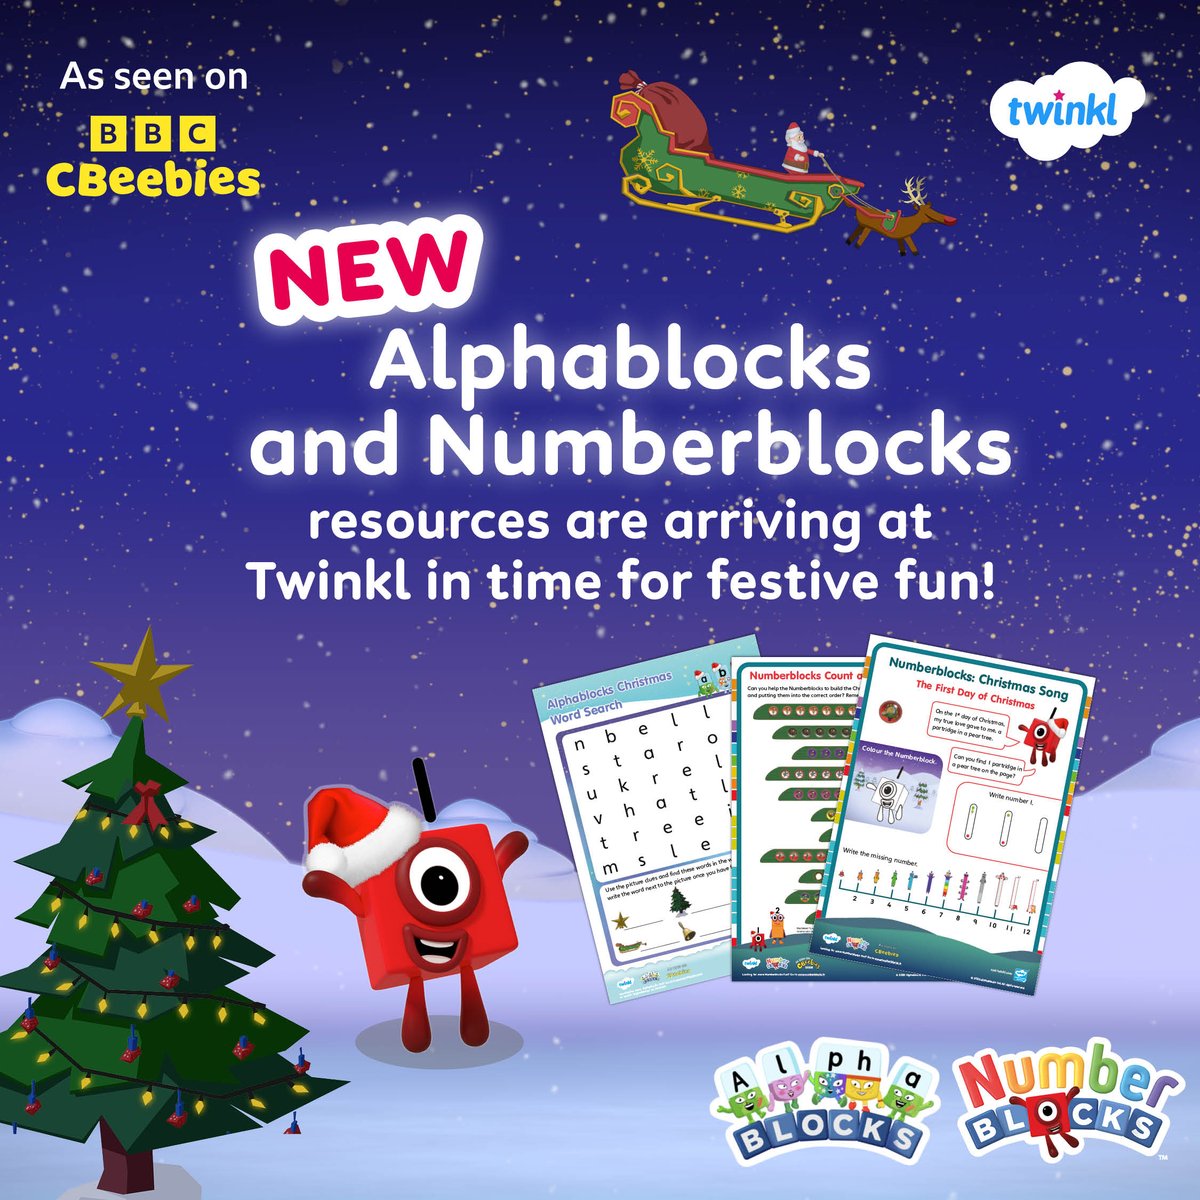 Does your class love Numberblocks and Alphablocks?🎄 🎉 Join the #BigBlocksParty and check out our brand NEW number and phonics learning resources to kick start the festive season! 👇 Alphablocks > twinkl.co.uk/l/101xxa Numberblocks > twinkl.co.uk/l/1dcldf